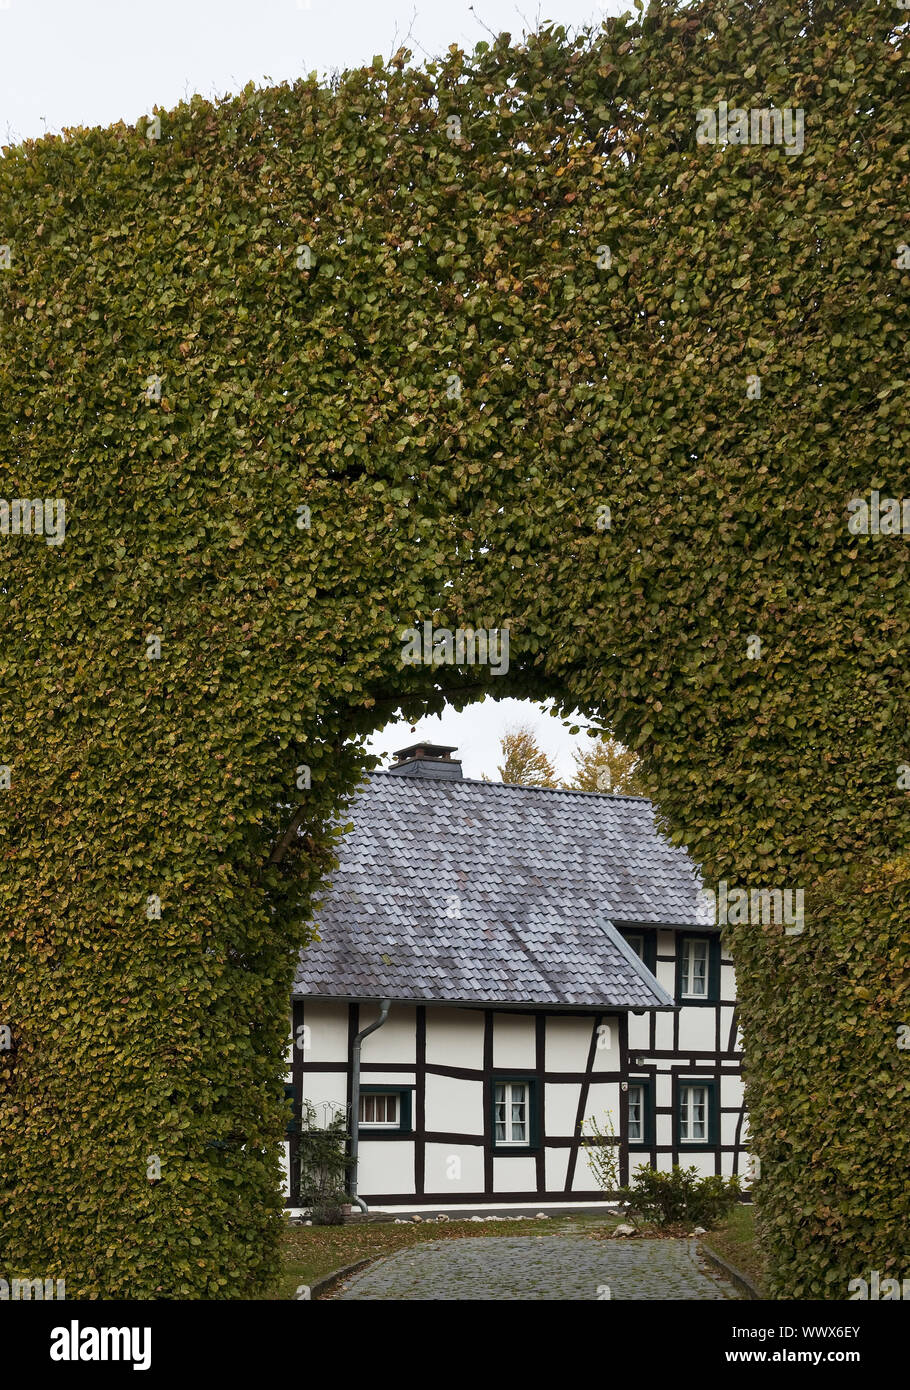 half-timbered house behind metere-high beech hedge with archway, Monschau, Eifel, Germany, Europe Stock Photo